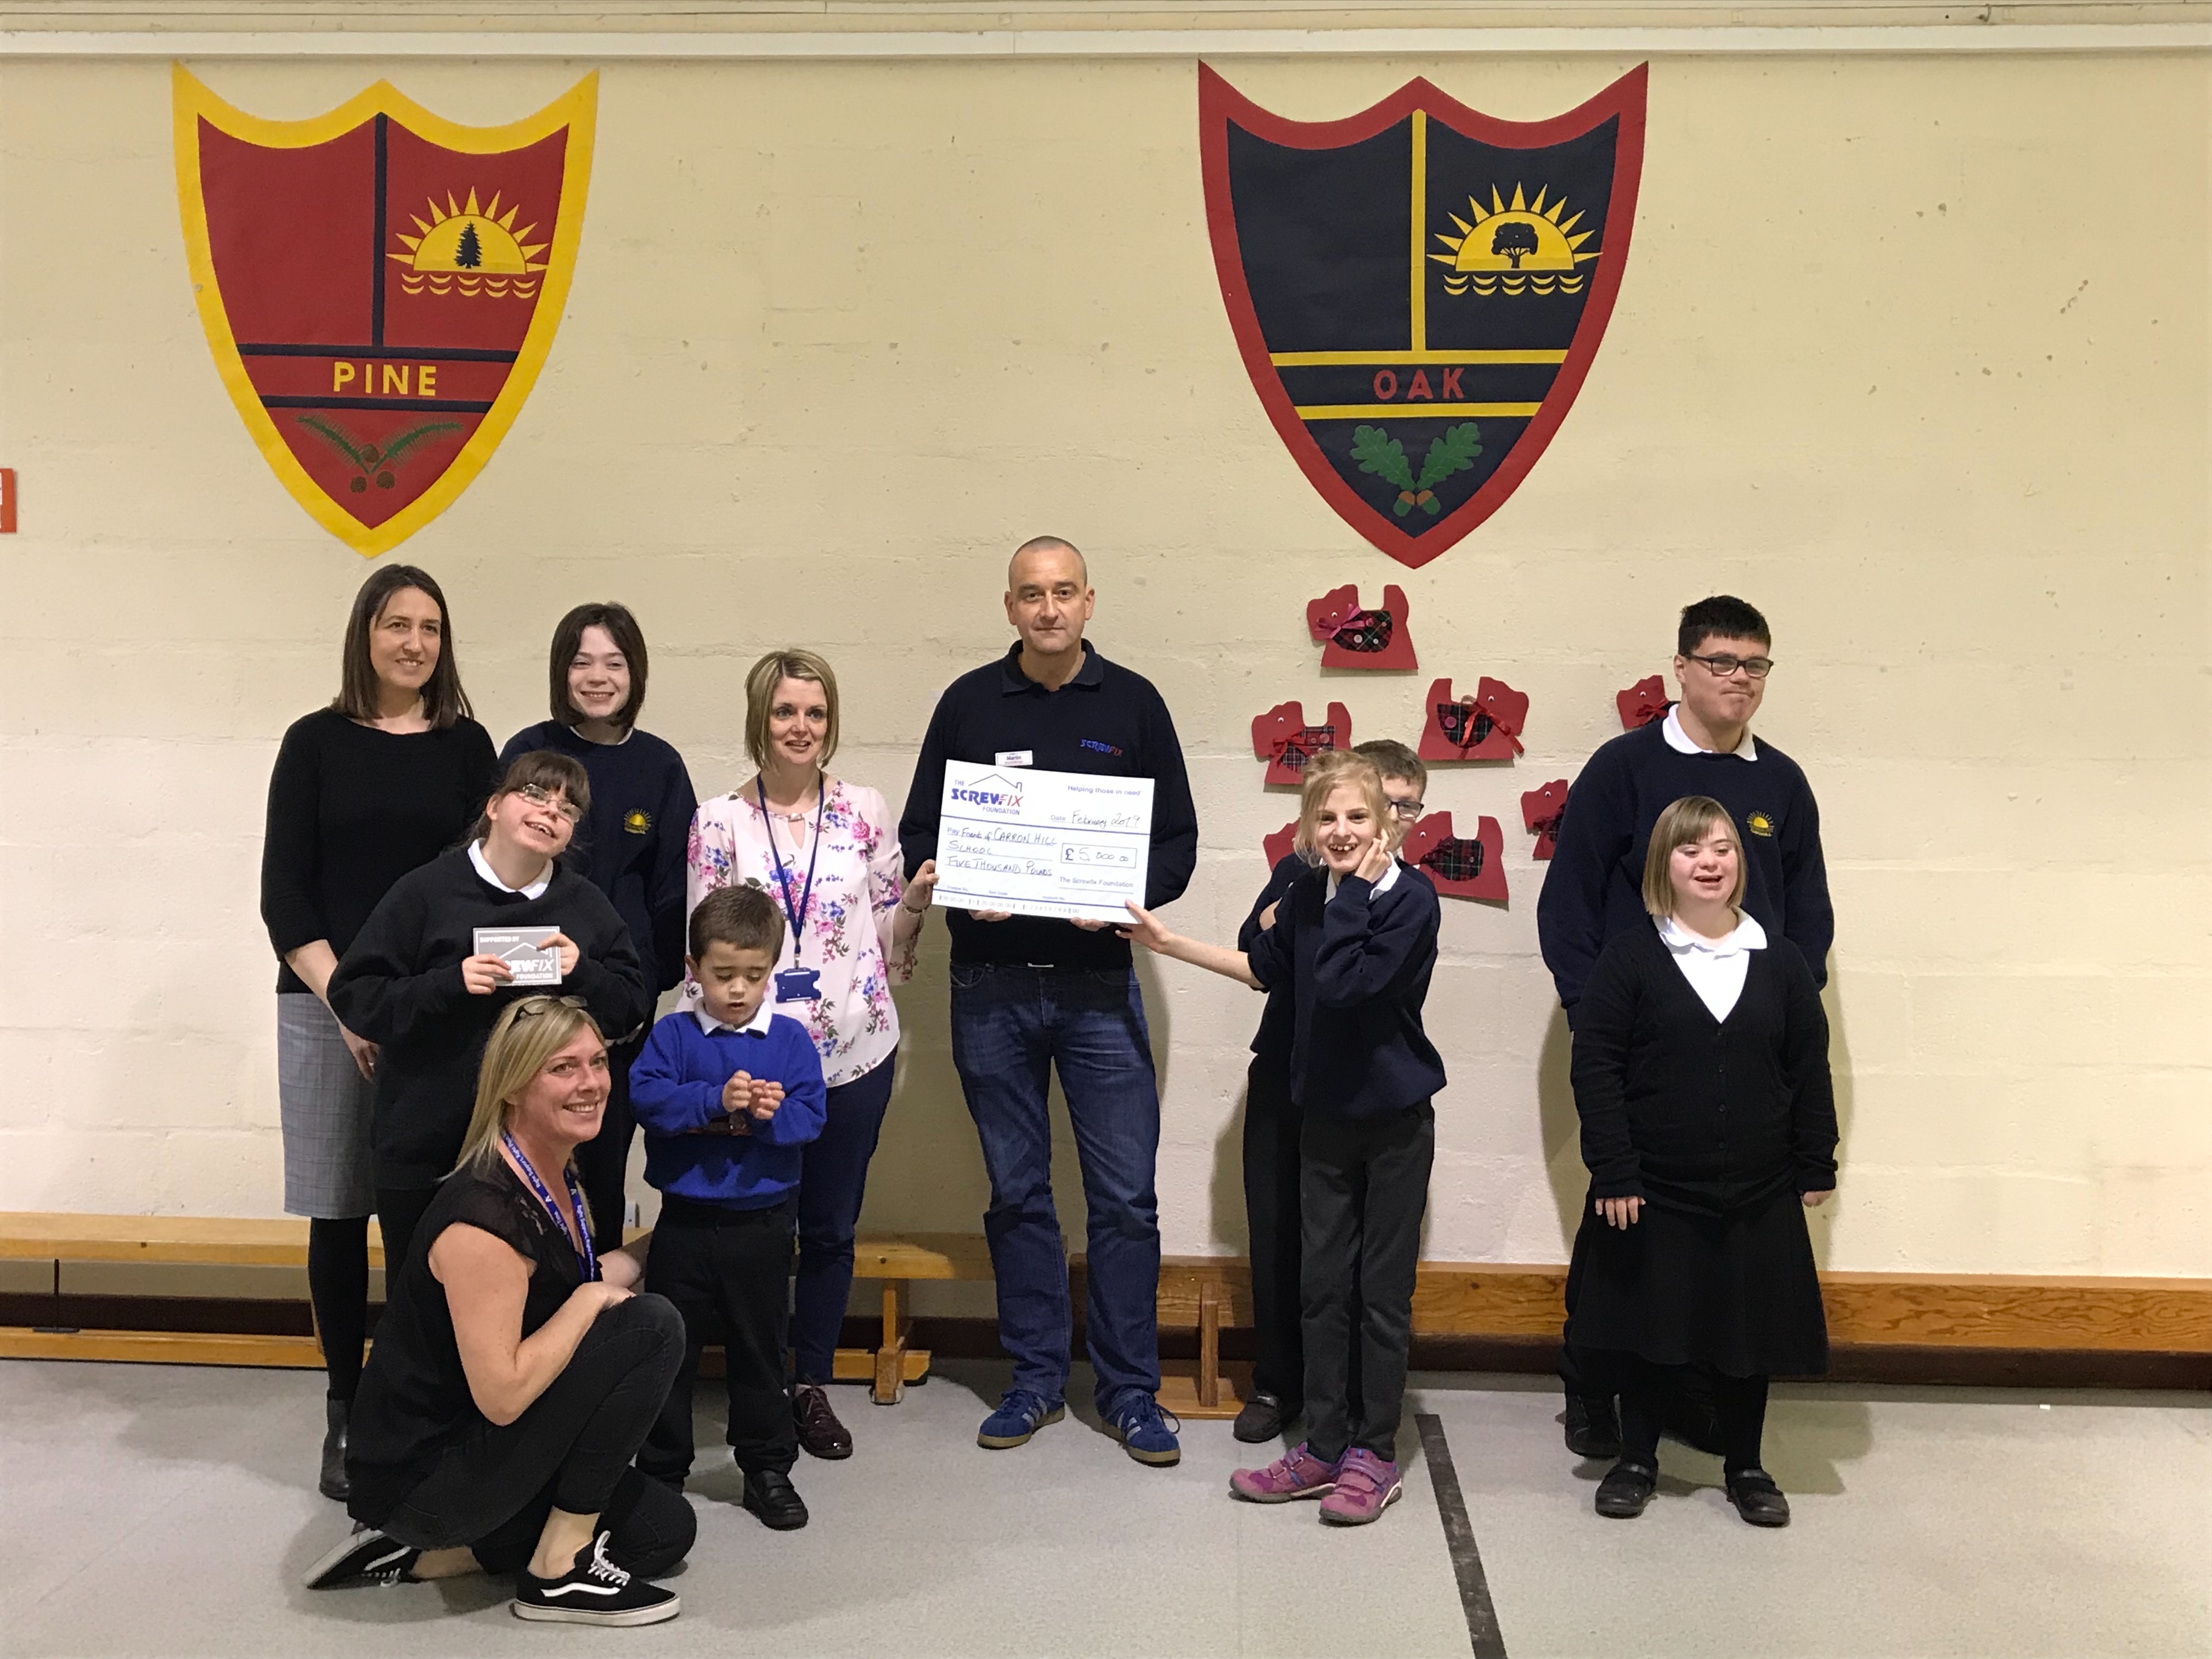 Friends of Carronhill School receive a helping hand from the Screwfix Foundation